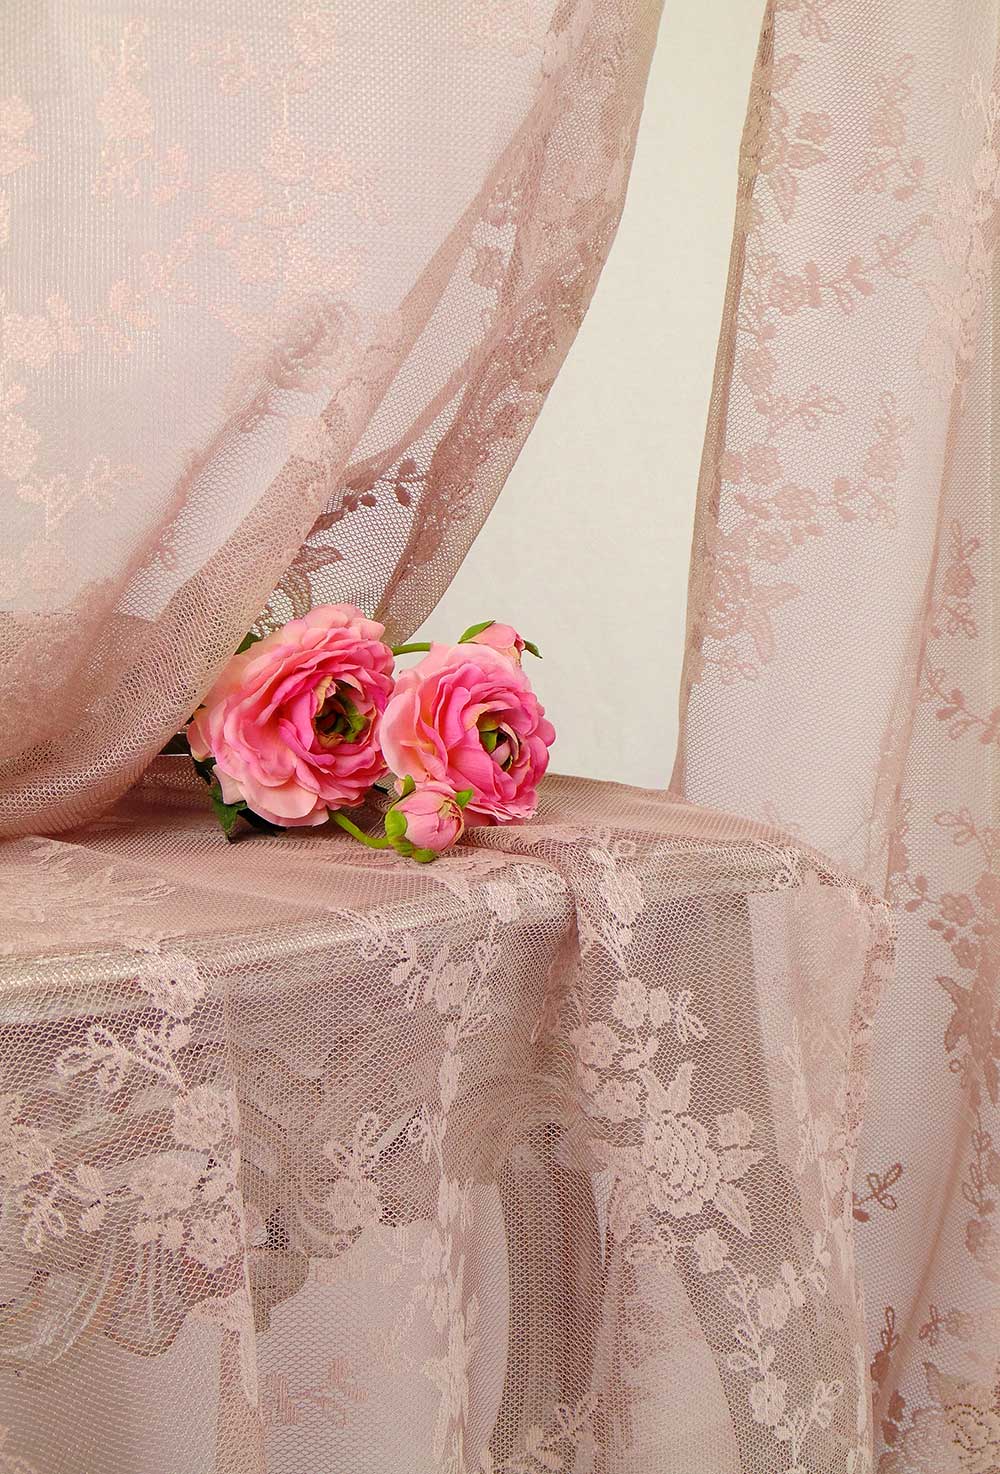 Shabby Chic Poly-Ciel Collection Polyester-Spitzenvorhang 140 x 290 Mauve